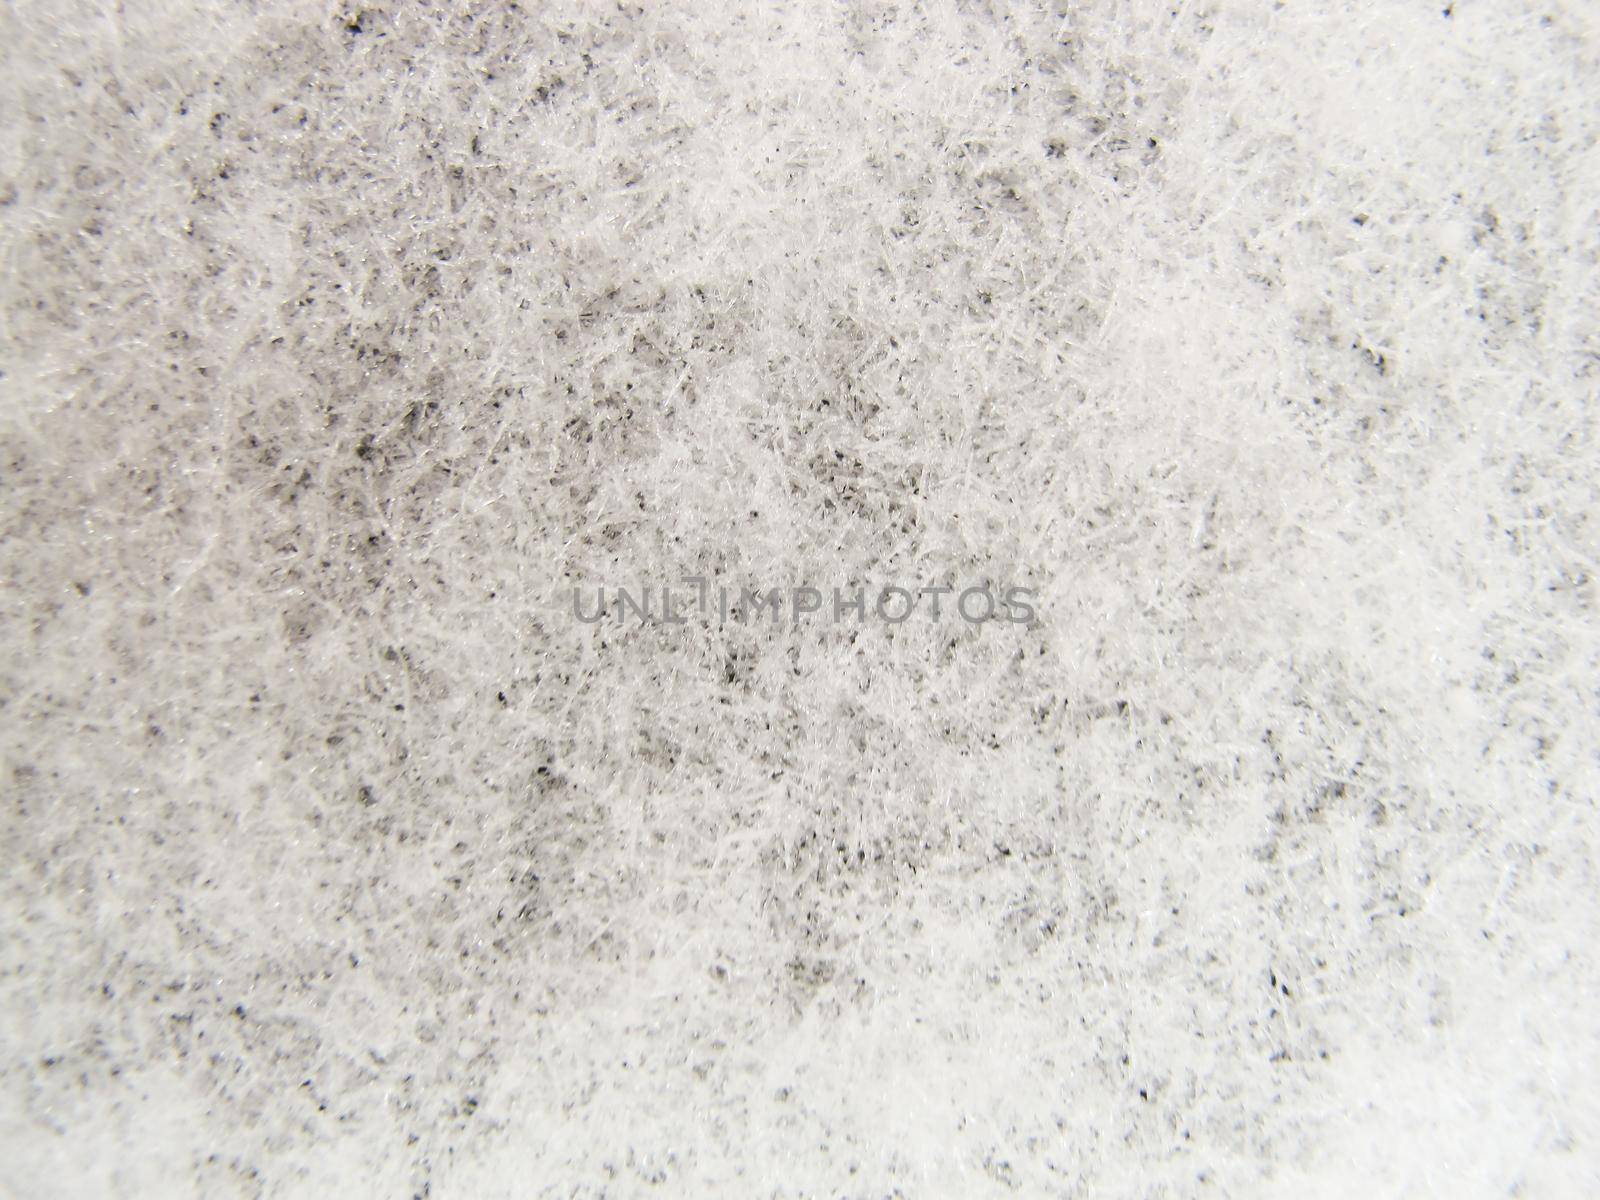 Background of fresh snow. Natural winter background. Snow texture in gray tone